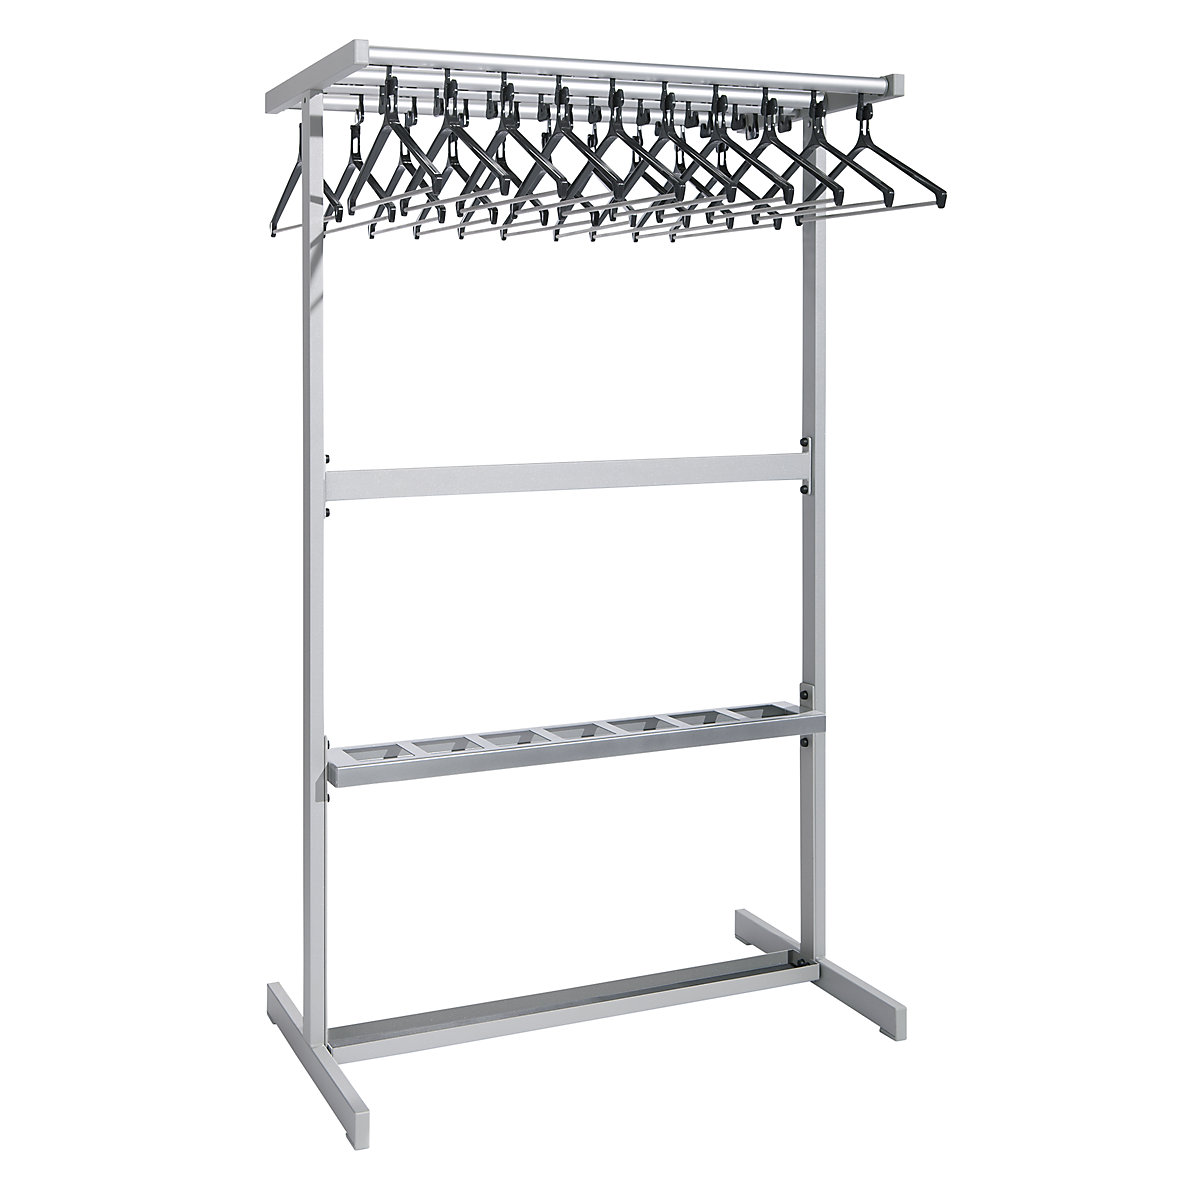 Double sided coat rail – eurokraft pro, with coat hangers, silver, with umbrella holder-6